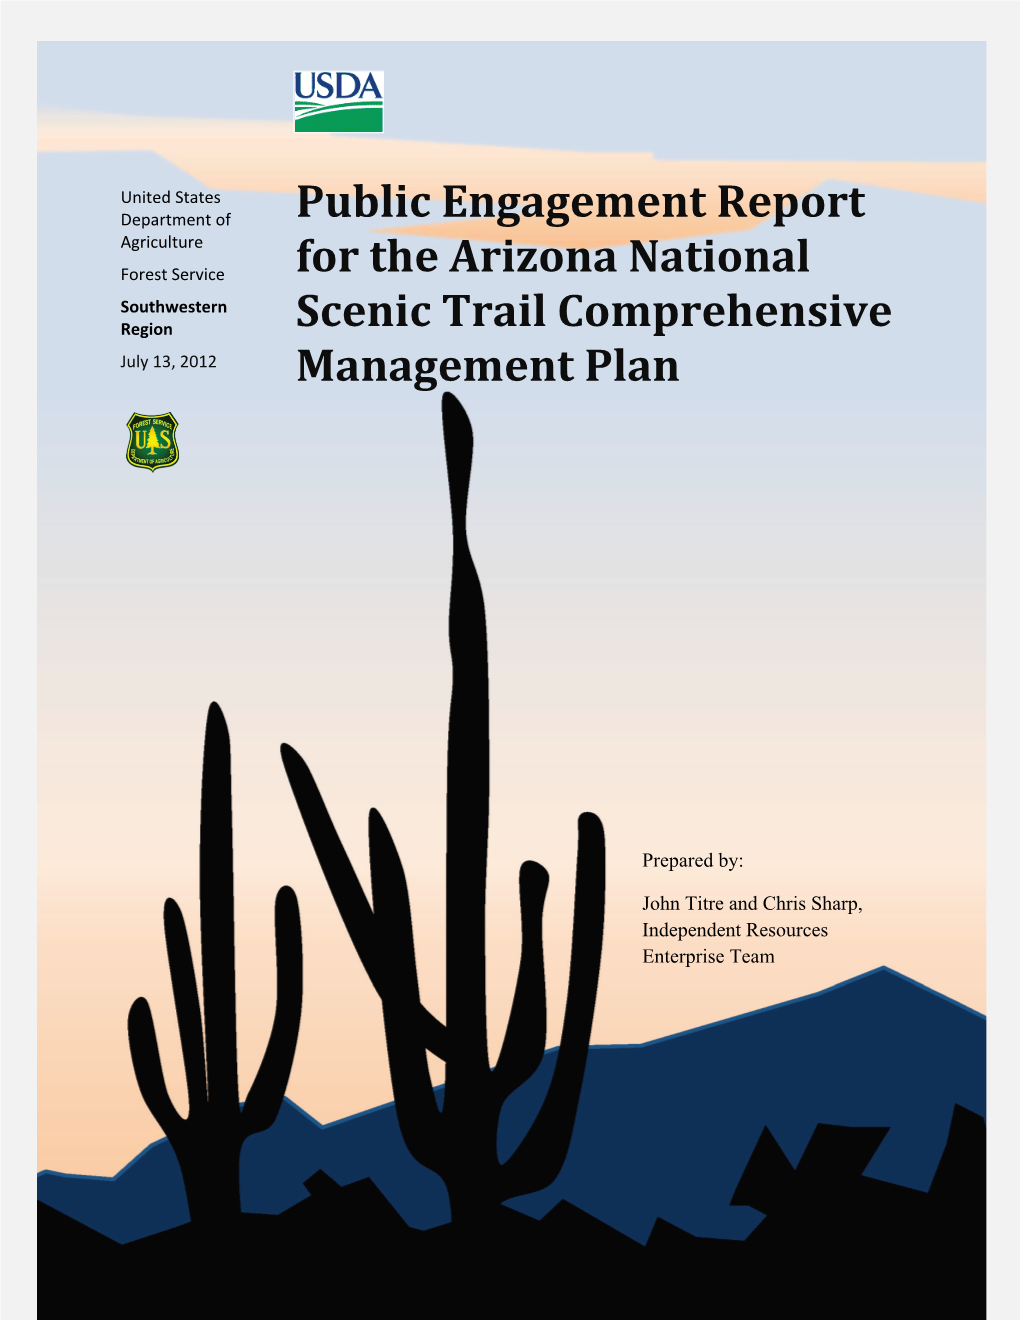 Public Engagement Report for the Arizona National Scenic Trail Comprehensive Management Plan